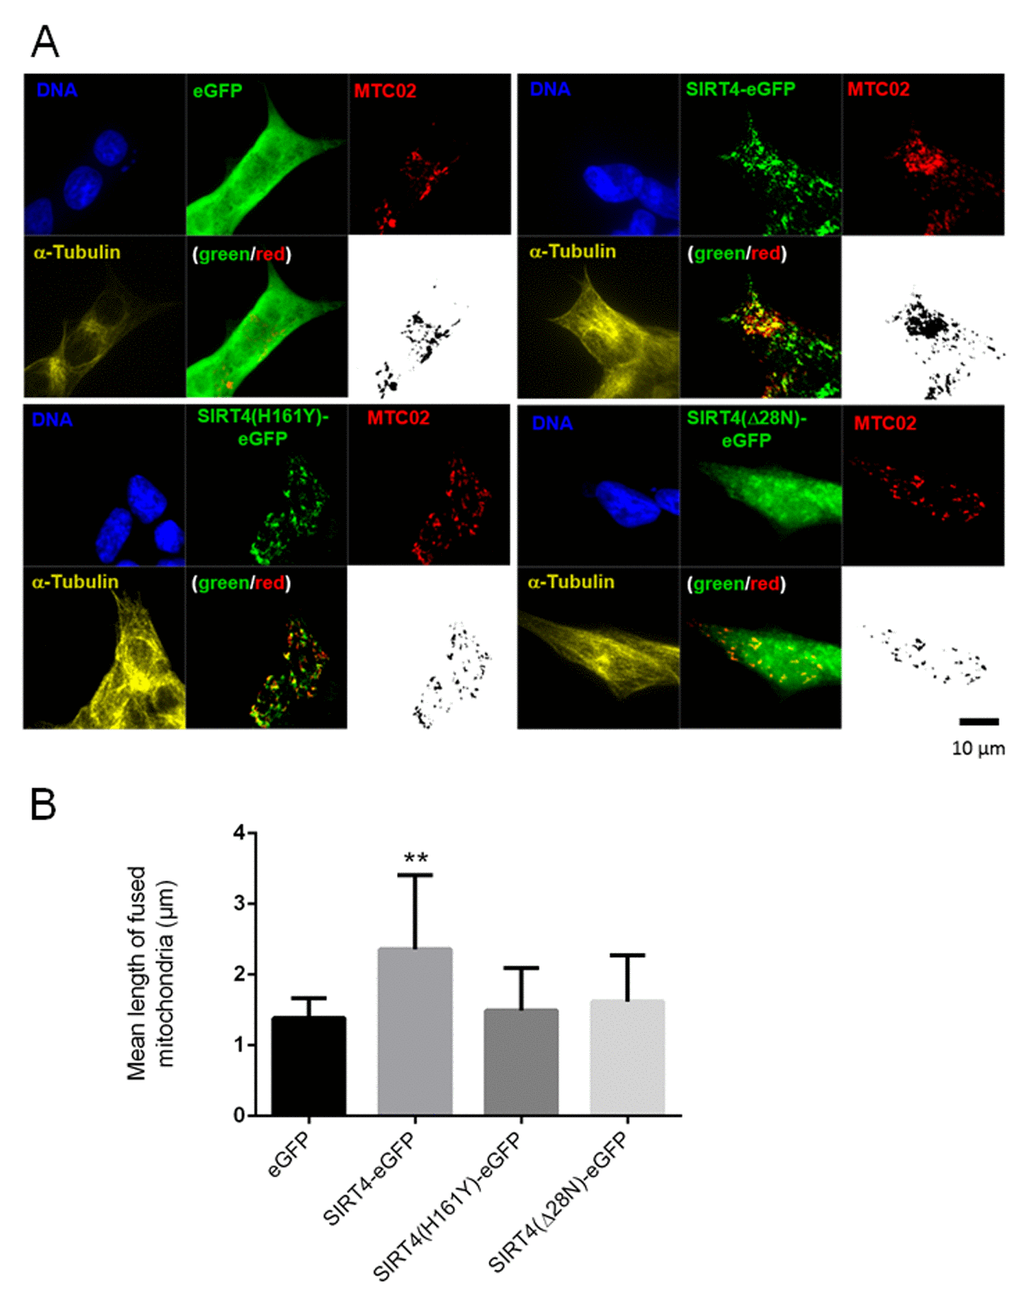 SIRT4-eGFP expression leads to increased mitochondrial aggregation/fusion. (A) Subcellular visualization of the mitochondrial marker MTC02 and α-Tubulin was performed by confocal microscopy in HEK293 cells stably expressing eGFP, SIRT4-eGFP, SIRT4(H161Y)-eGFP, or SIRT4(Δ28N)-eGFP. Mitochondrial profiles (MTC02; black/white pictures) were visualized using ImageJ software (Material & Methods and suppl. Material & Methods) to integrate microscopic confocal pictures. Cellular morphology/size was defined by α-Tubulin staining. Representative images are depicted. (B) Quantification of the mean length of fused mitochondria in cells expressing SIRT4-eGFP or its mutants. Numbers of cells analyzed from four experiments: eGFP, 136; SIRT4-eGFP, 75; SIRT4(H161Y)-eGFP, 104; SIRT4(Δ28N)-eGFP, 107. To evaluate statistical significance (compared to eGFP), two-way ANOVA followed-up by Tukey’s test was performed (**p